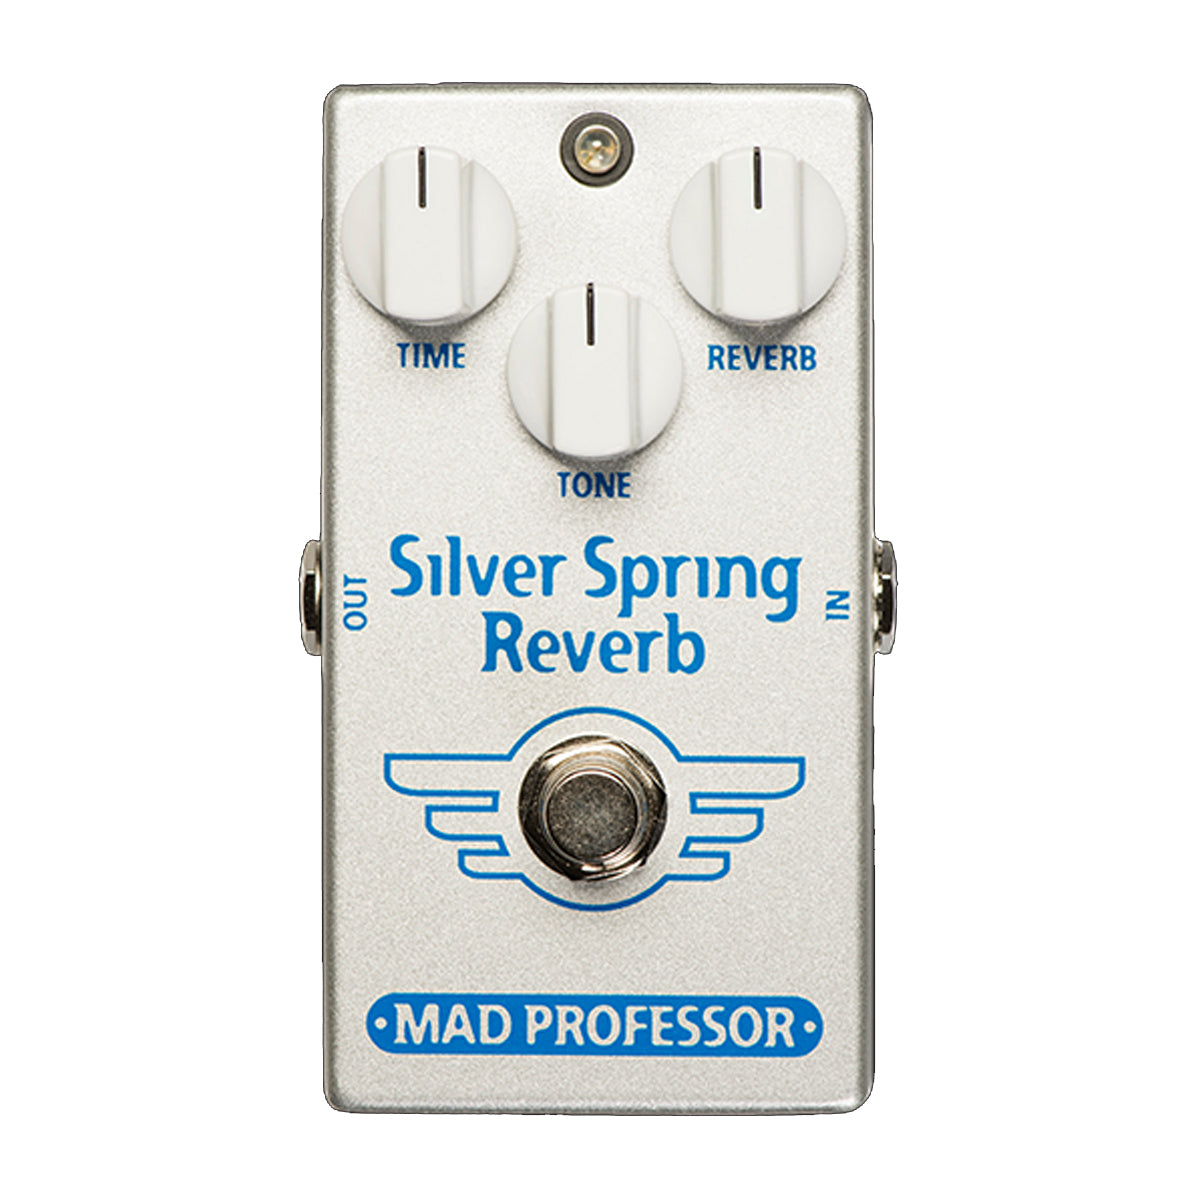 Mad Professor Silver Spring Reverb Effects Pedal